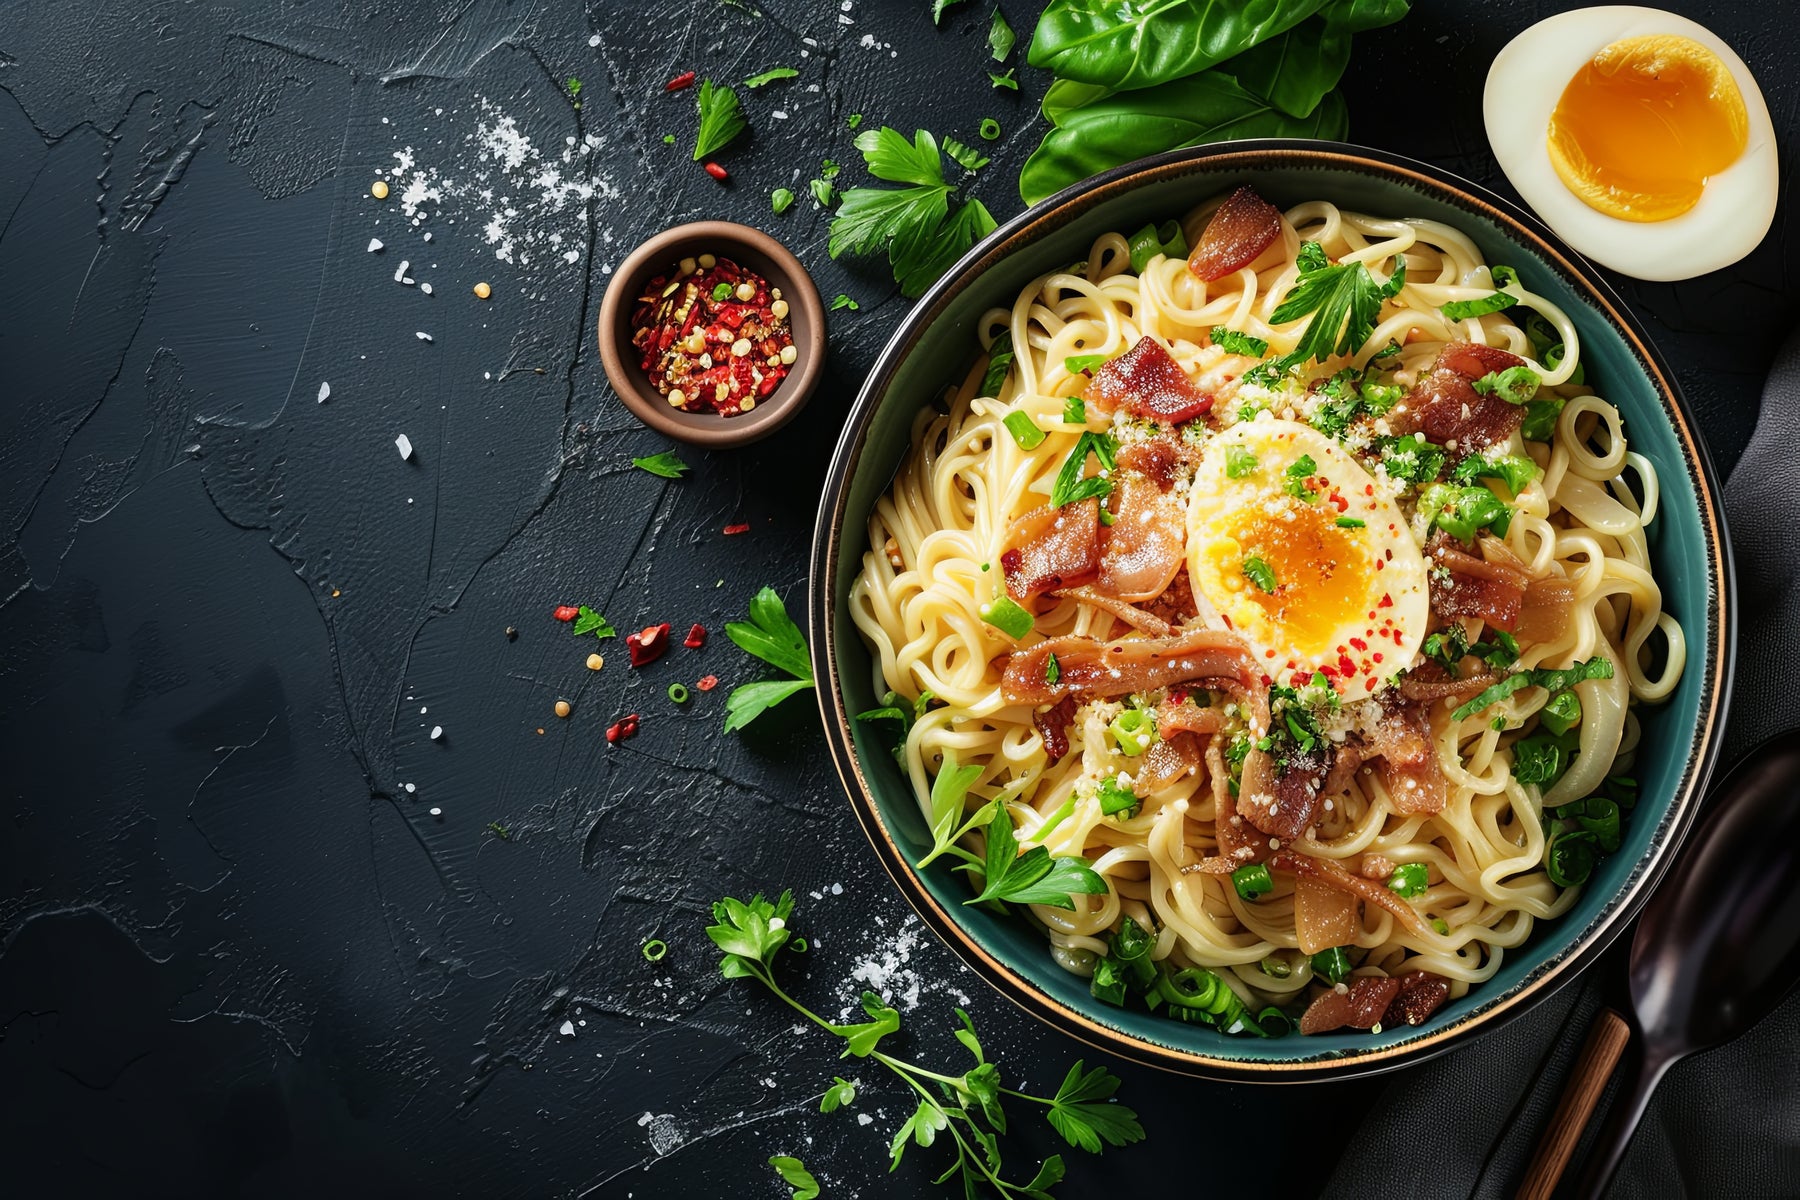 What Is Samyang Carbonara? A Guide to the Spicy Korean Noodle Dish